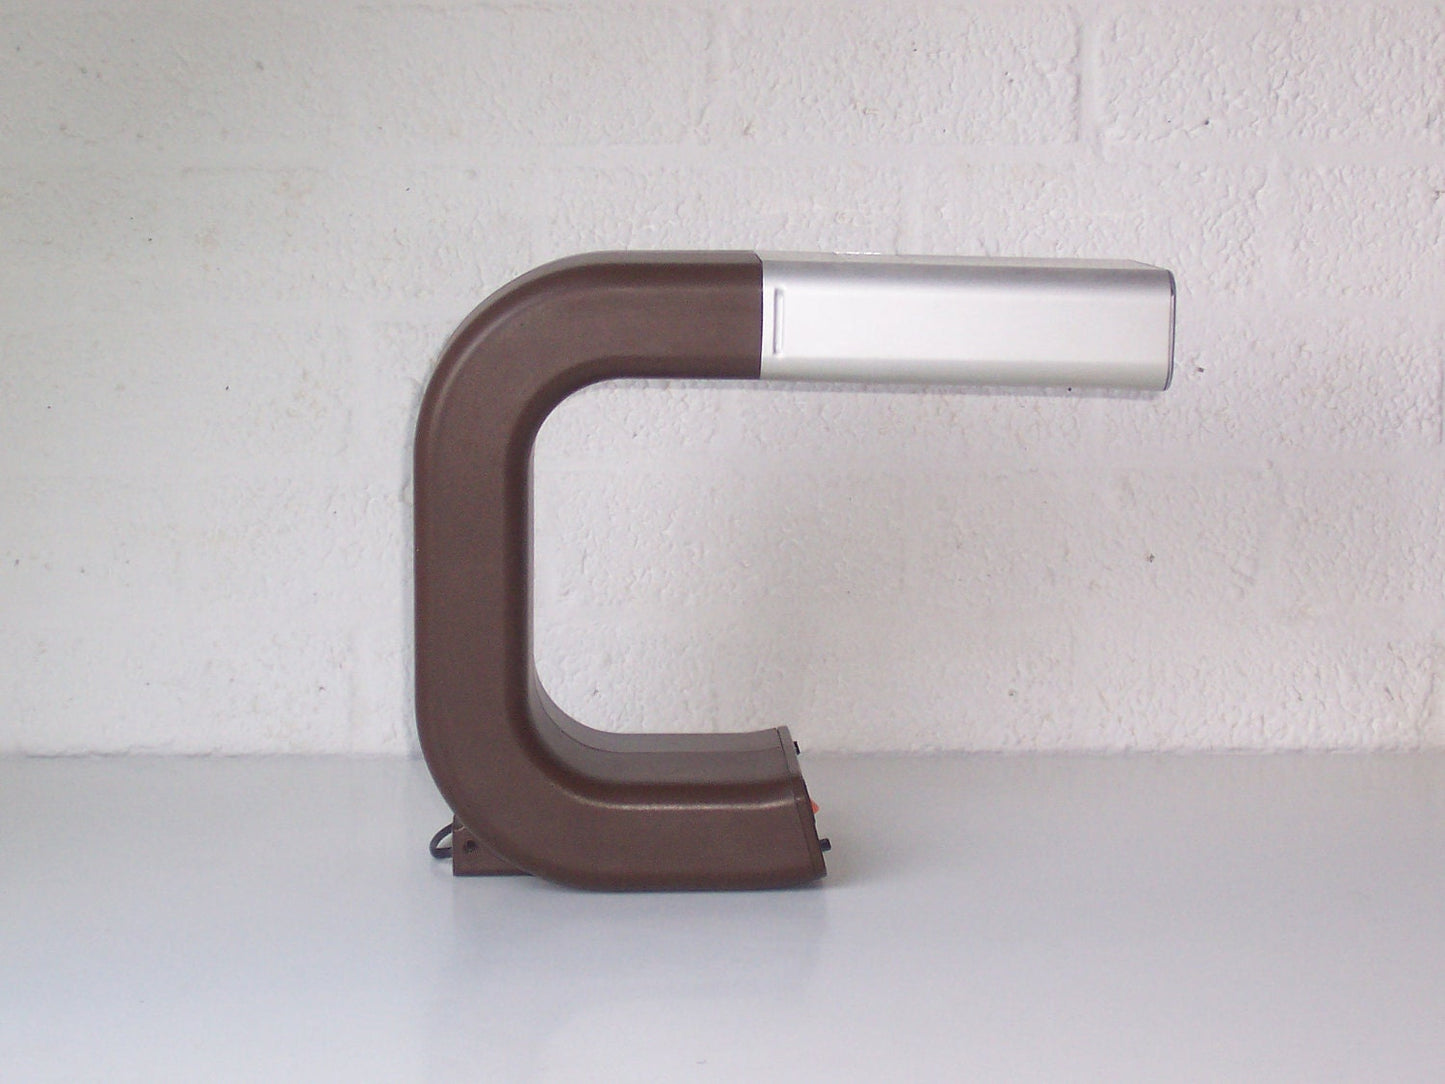 Pfaffle Space age alarm clock with lamp